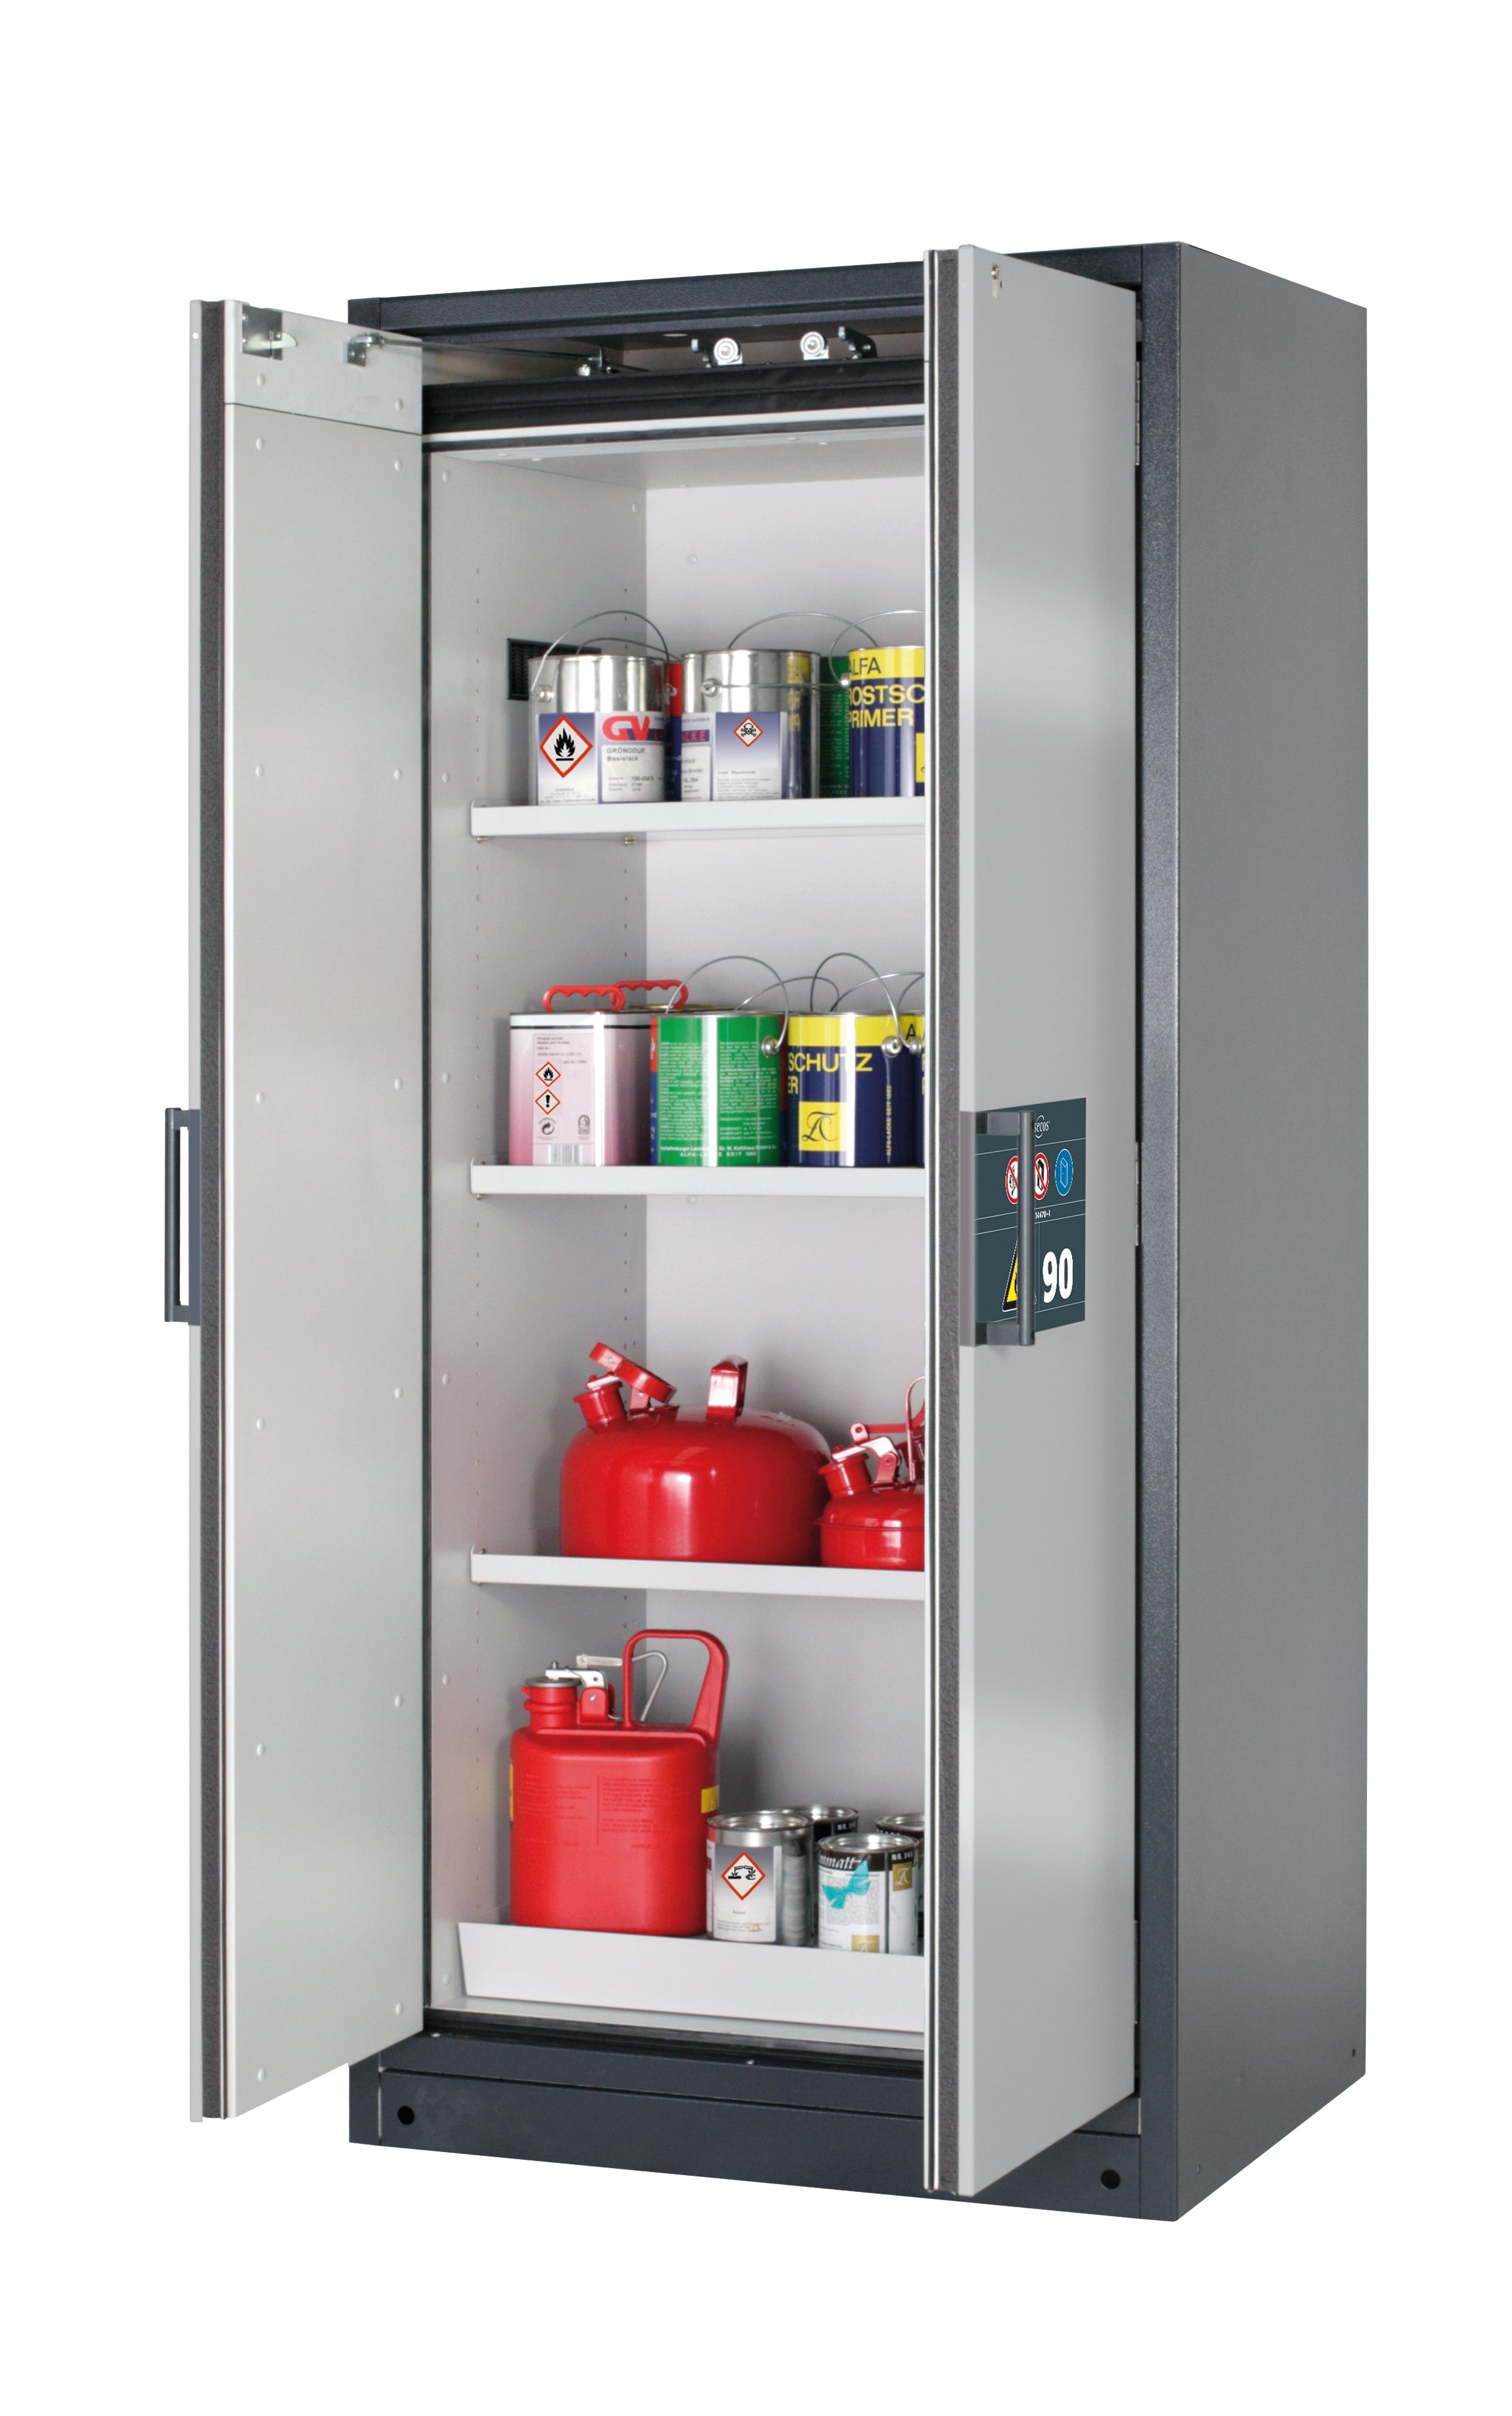 Type 90 safety storage cabinet Q-CLASSIC-90 model Q90.195.090 in asecos silver with 3x shelf standard (sheet steel),